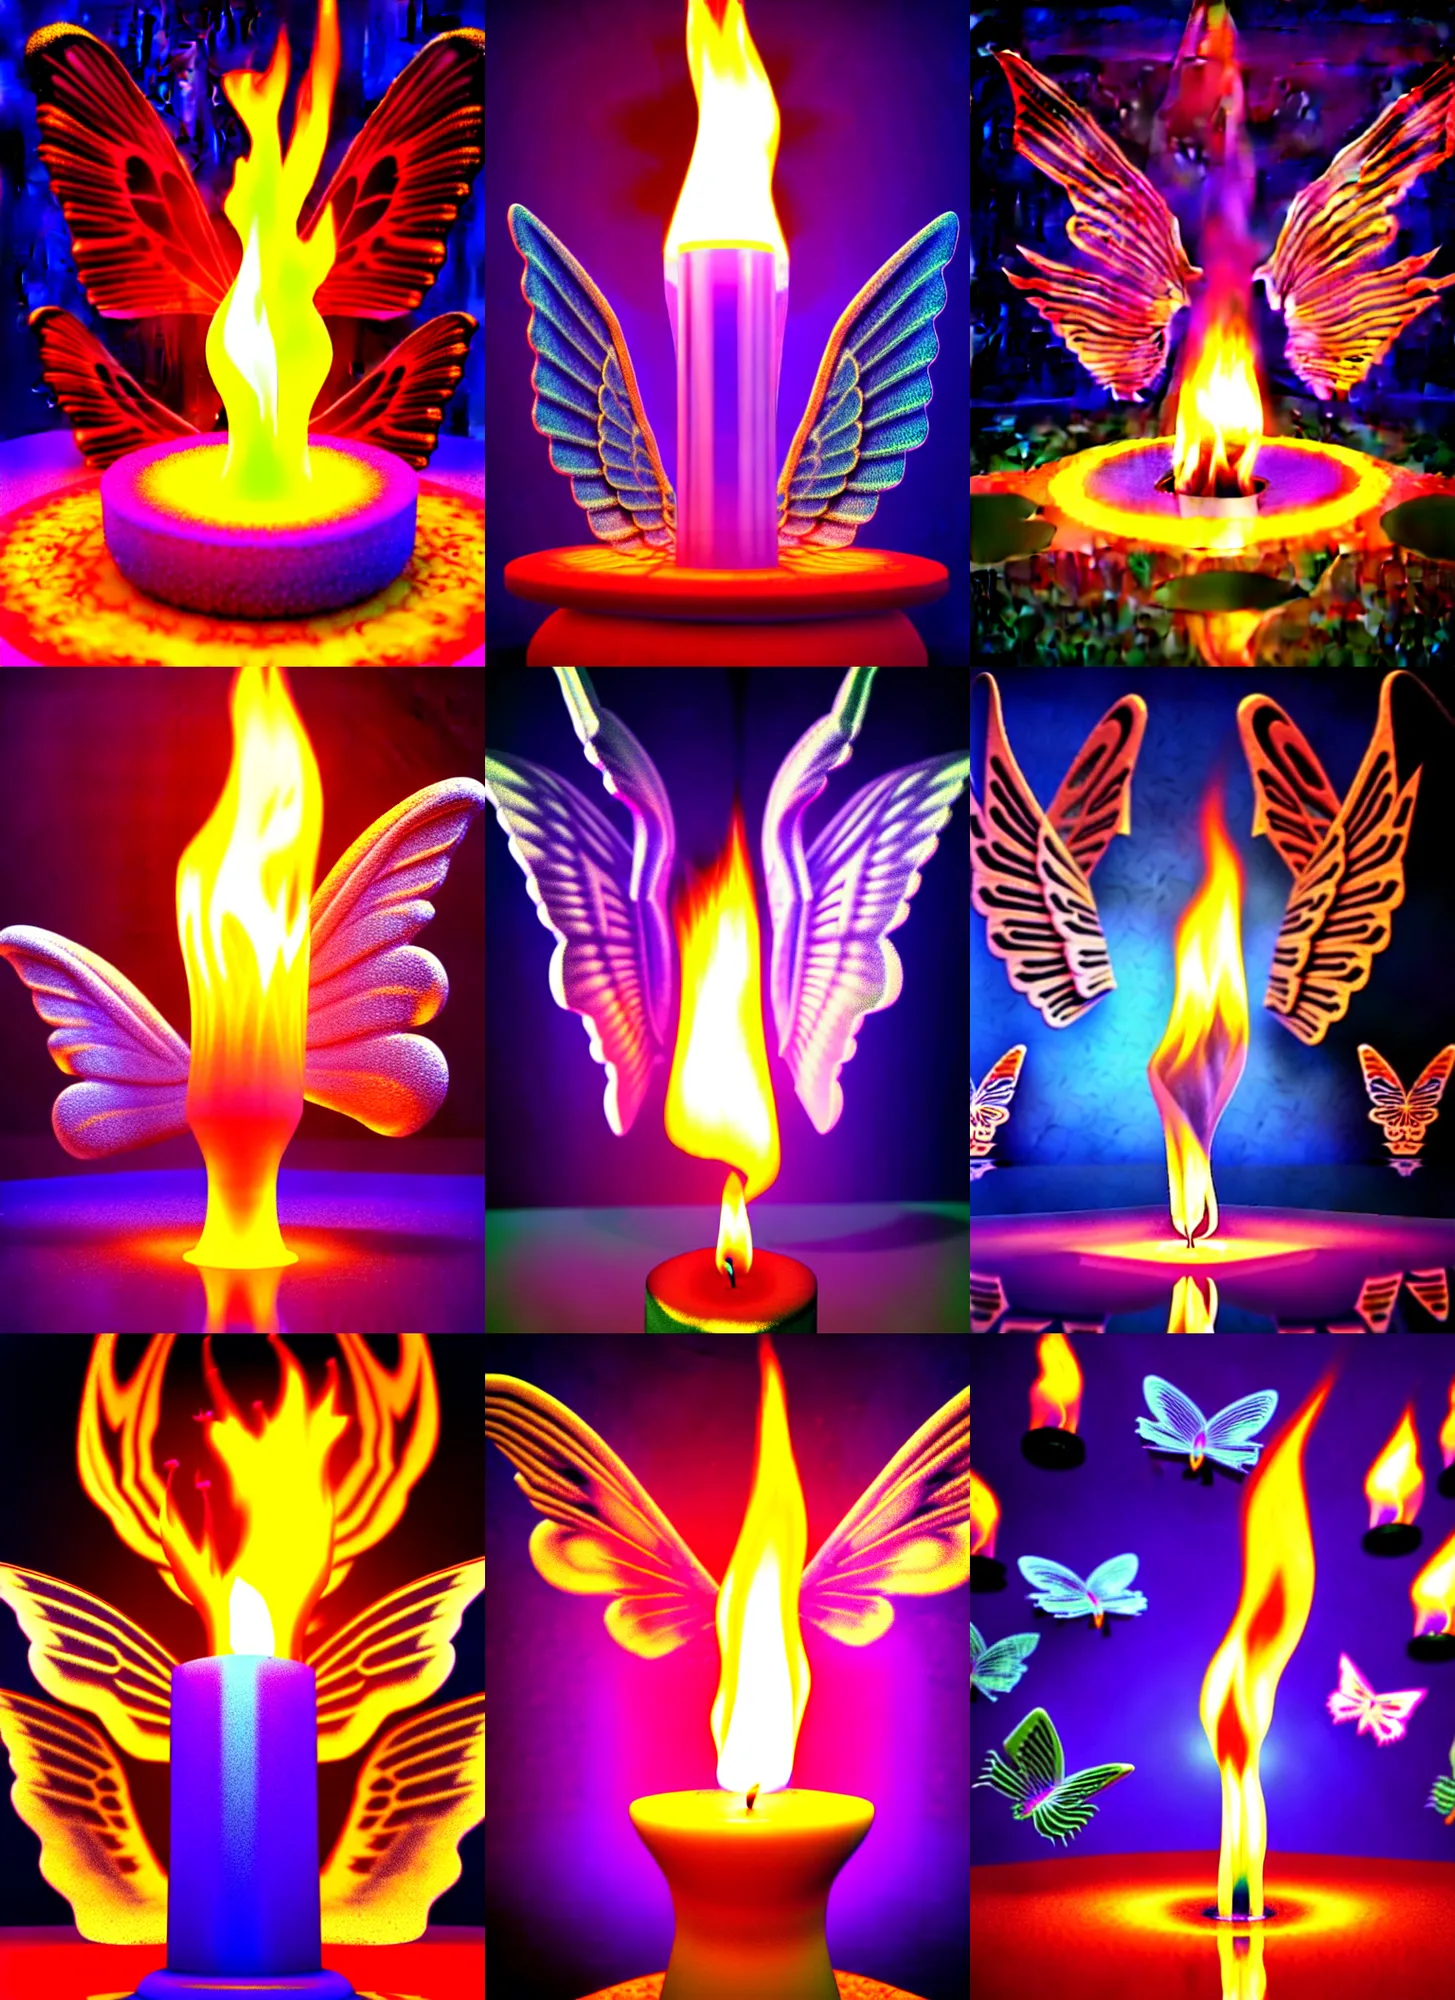 Prompt: 3 d render of melting candle small flame on a open tome melting with angel wings against a psychedelic surreal background with 3 d butterflies and 3 d flowers n the style of 1 9 9 0's cg graphics 3 d rendered y 2 k aesthetic by ichiro tanida, 3 do magazine, wide shot